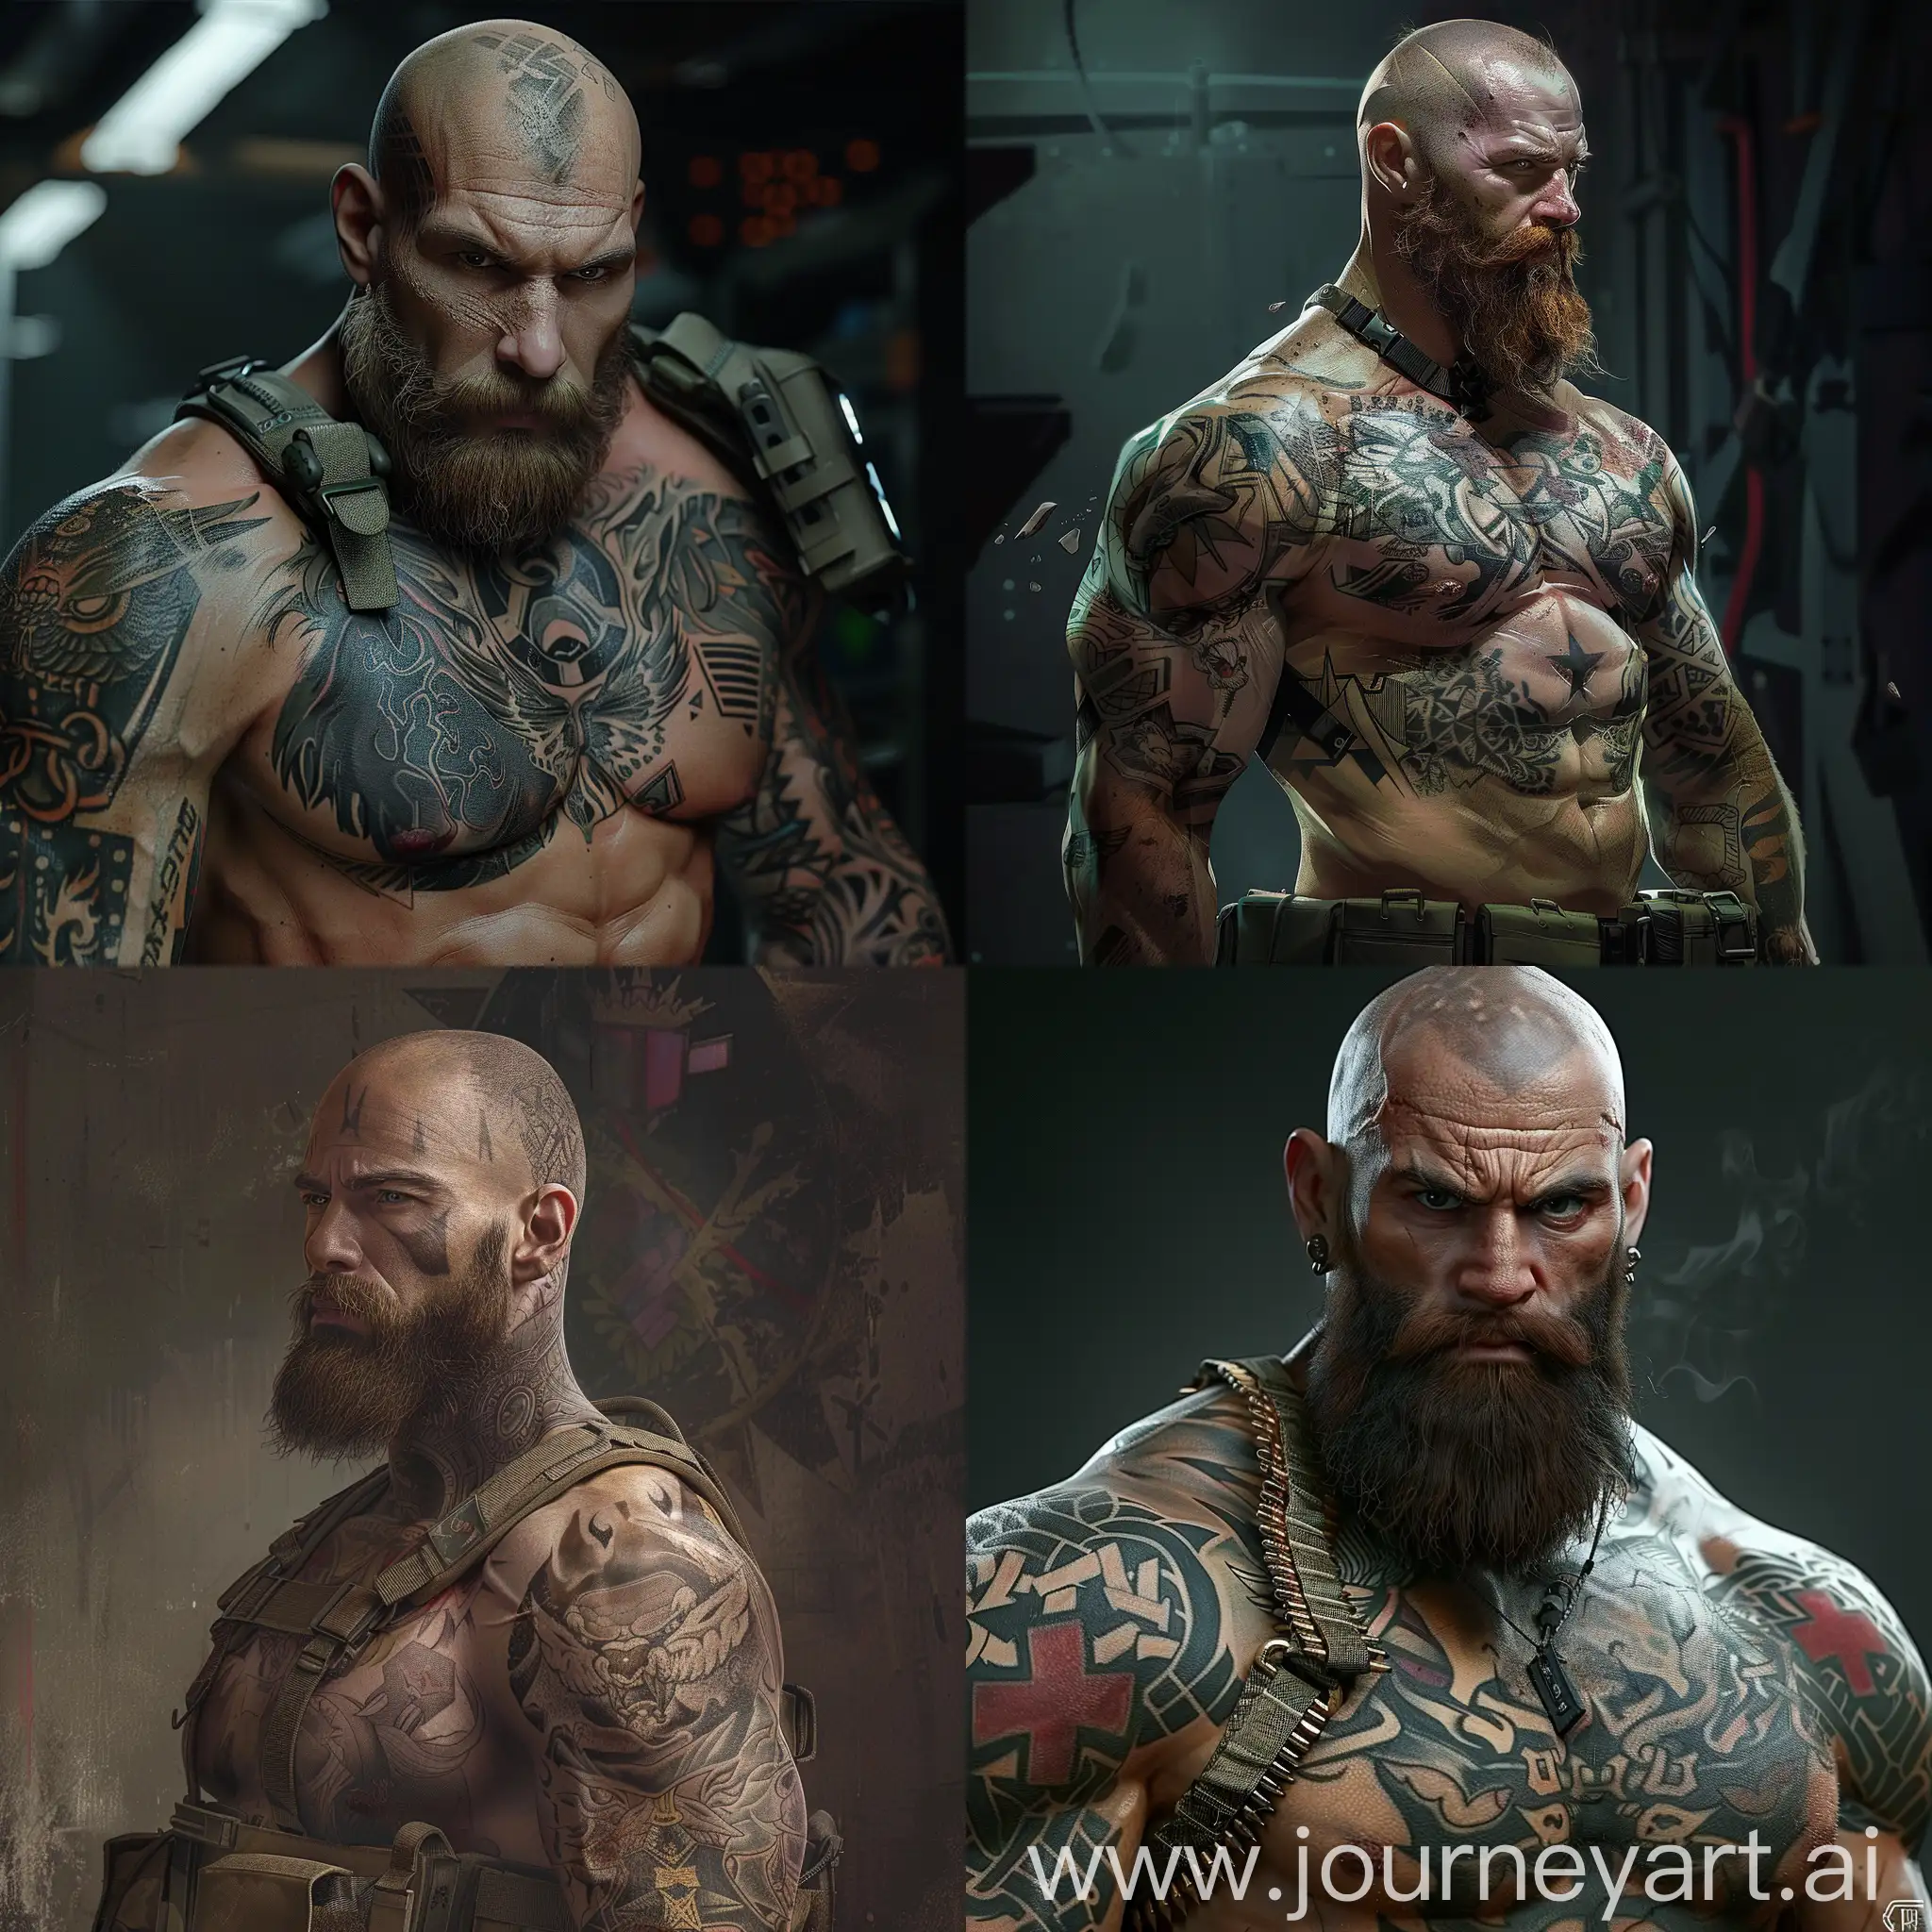 Muscular-Bald-Man-with-Beard-and-Tattoos-Standing-Next-to-Military-Vehicle